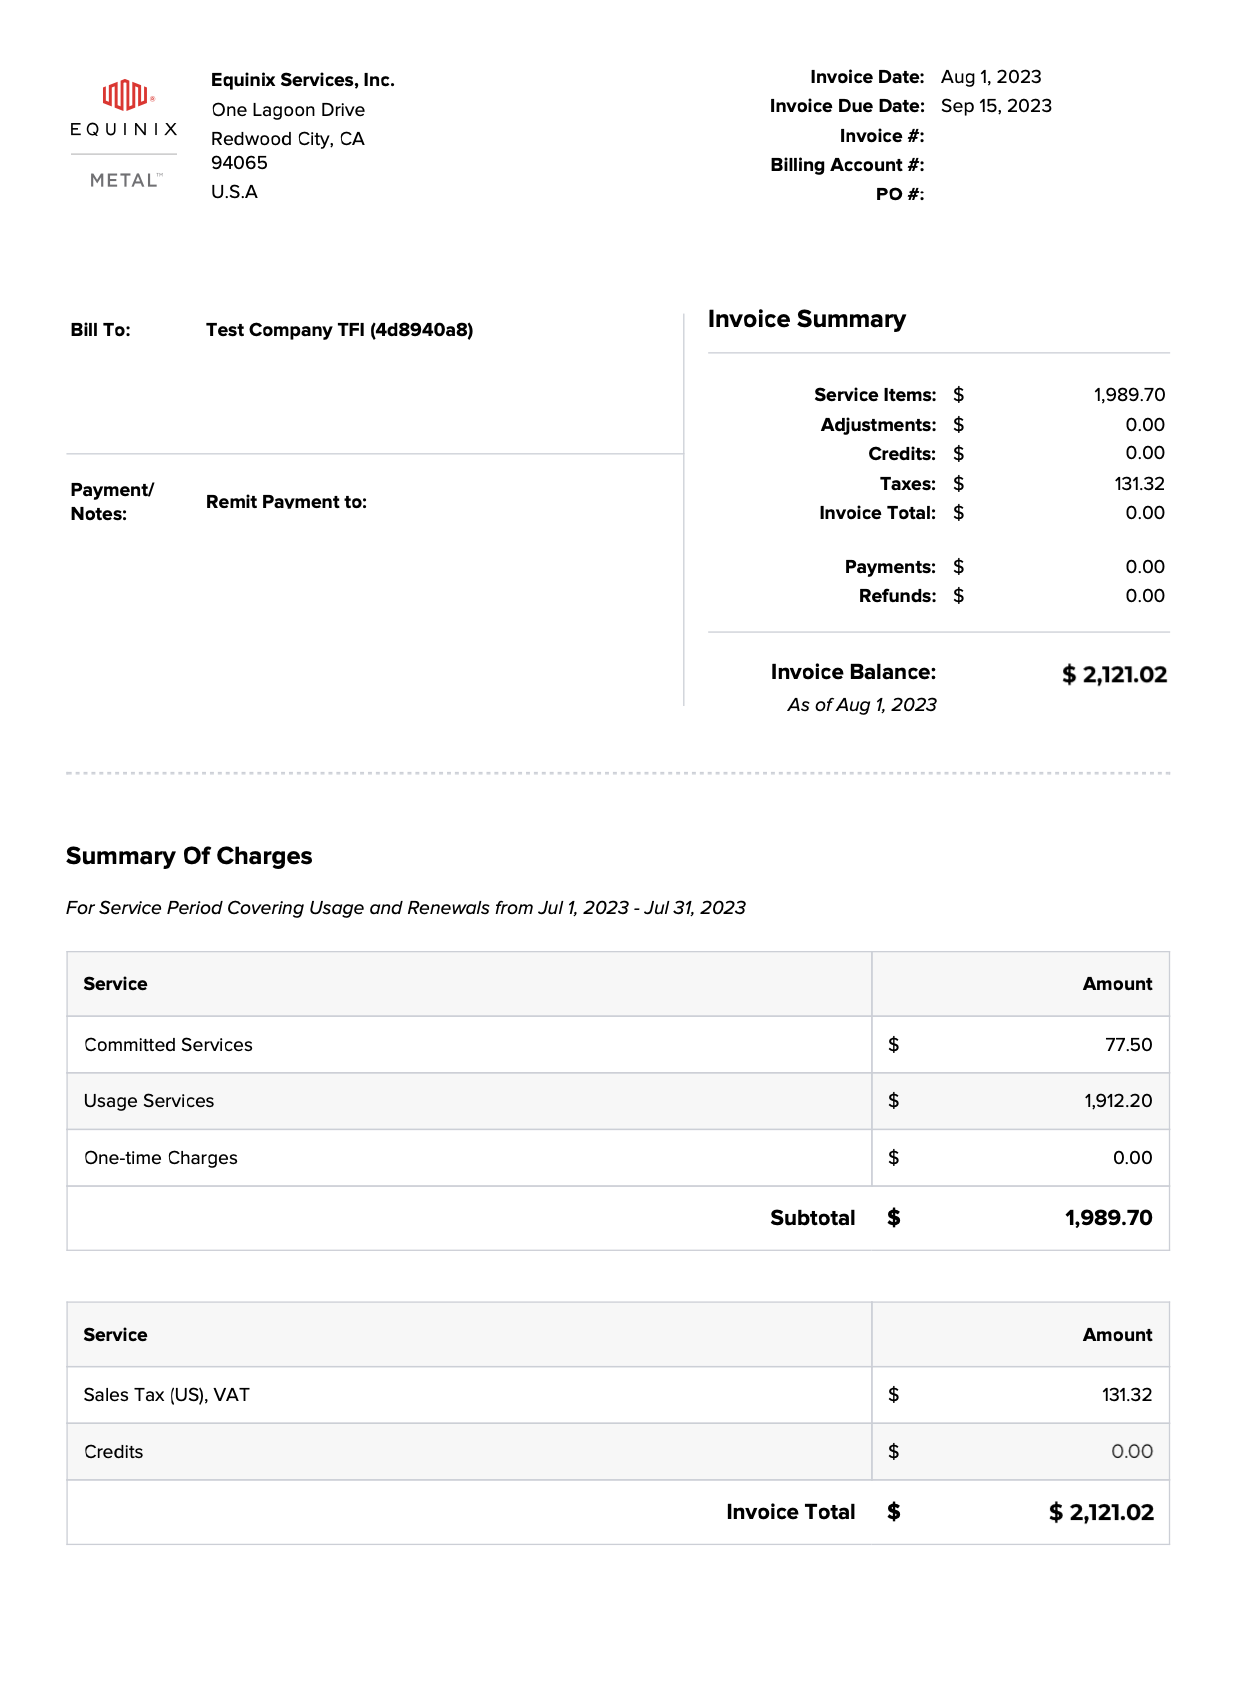 Example Invoice Page 1, Summary Page